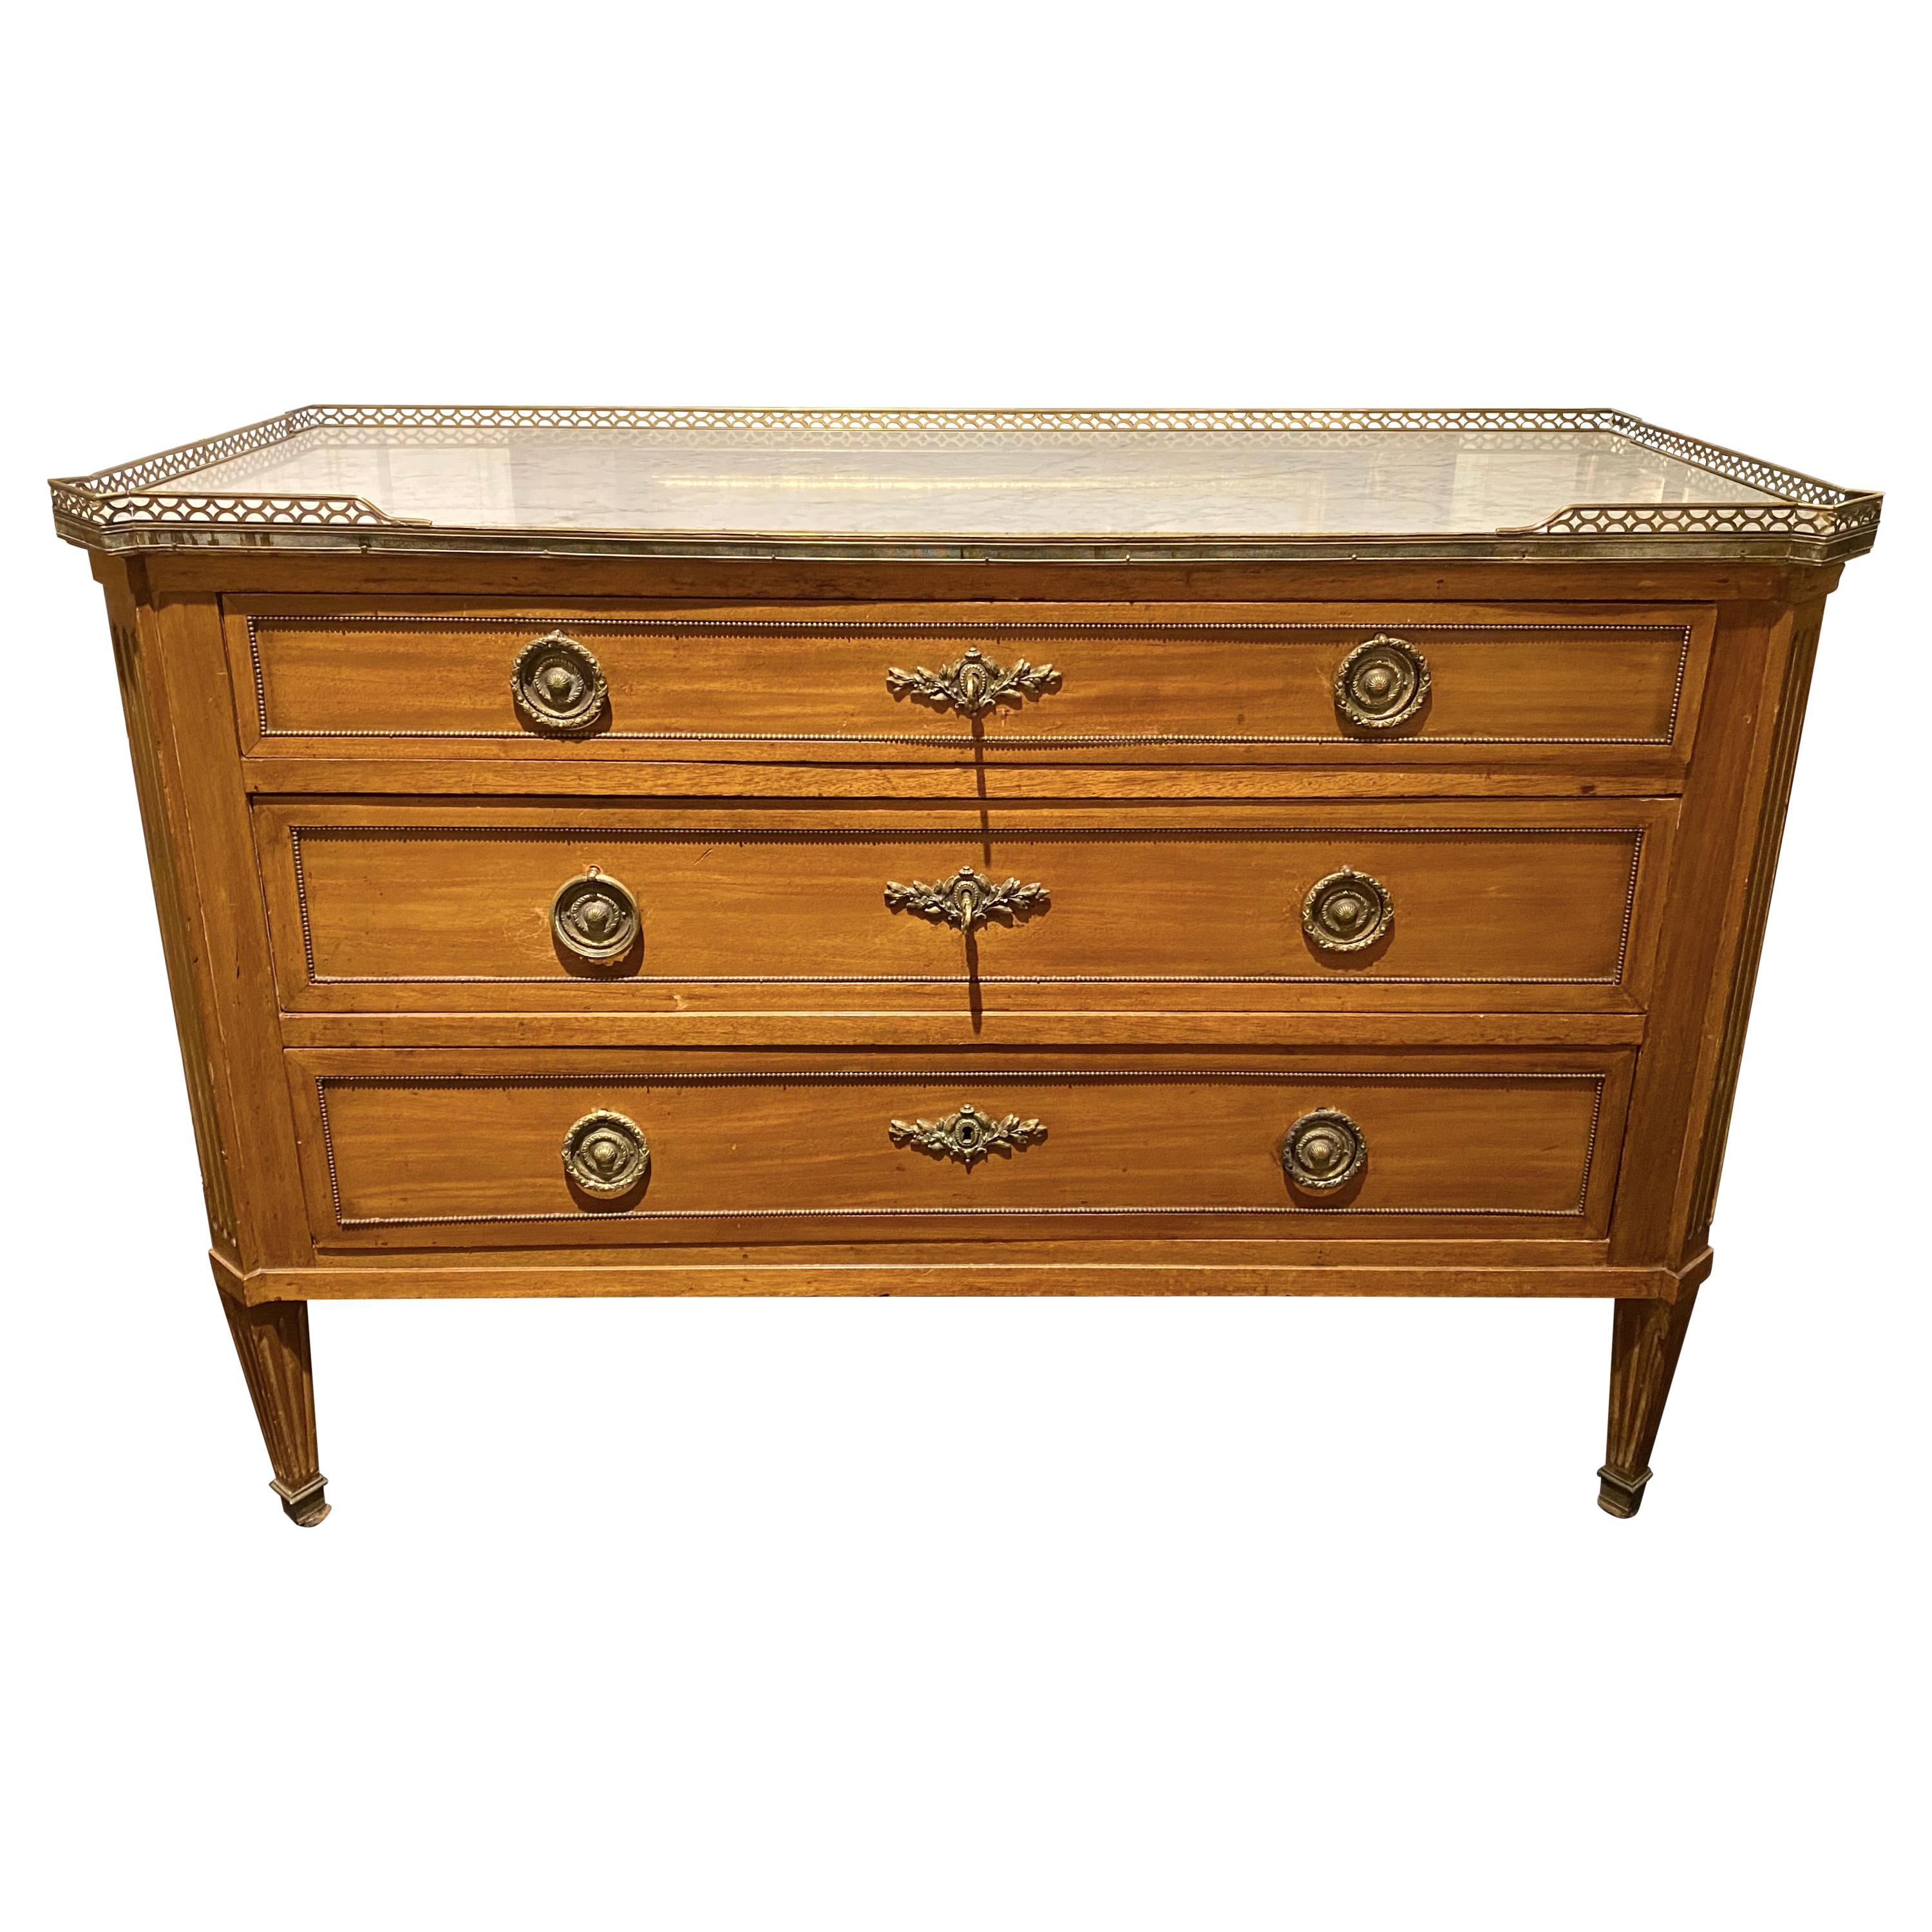 Louis XVI Style Commode Dresser, Marble-Top with Bronze Frieze, Pale Golden Wood